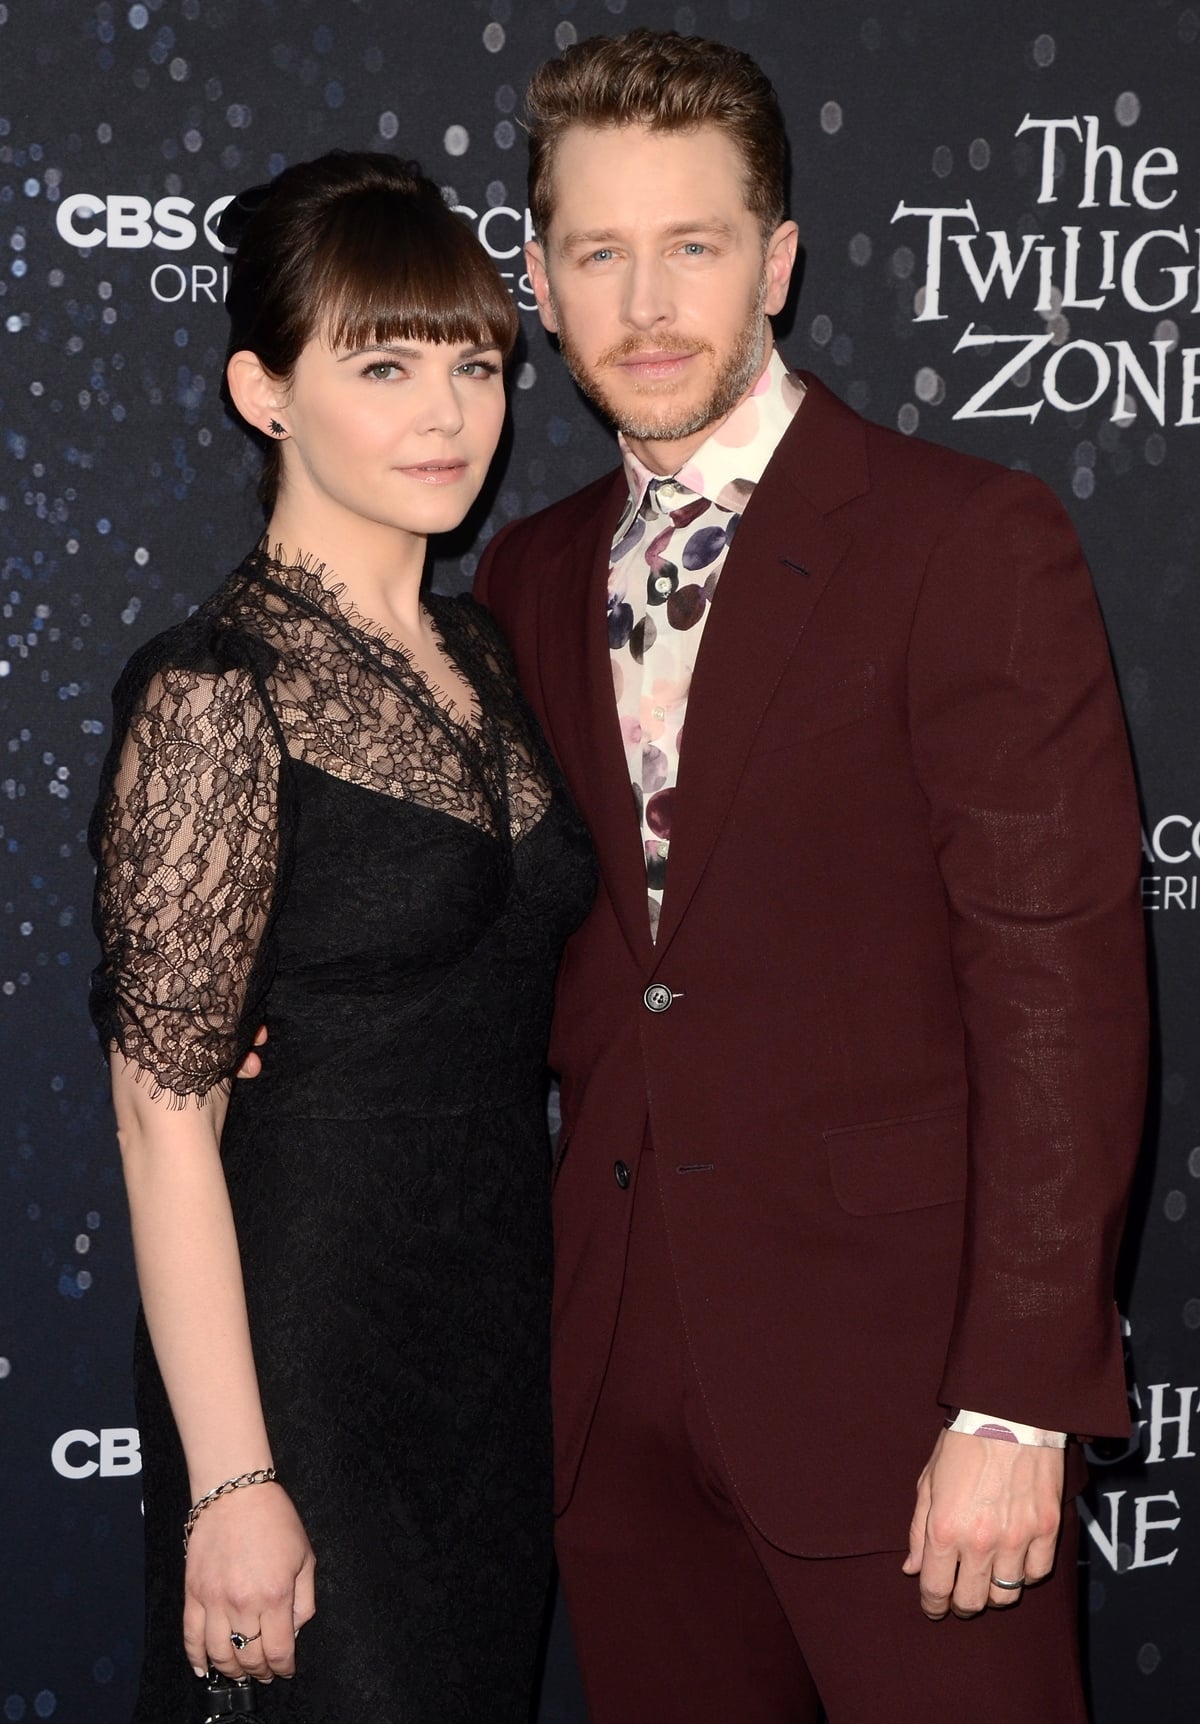 Ginnifer Goodwin and Josh Dallas met in 2011 on the set of Once Upon a Time, married in 2014, and share two sons